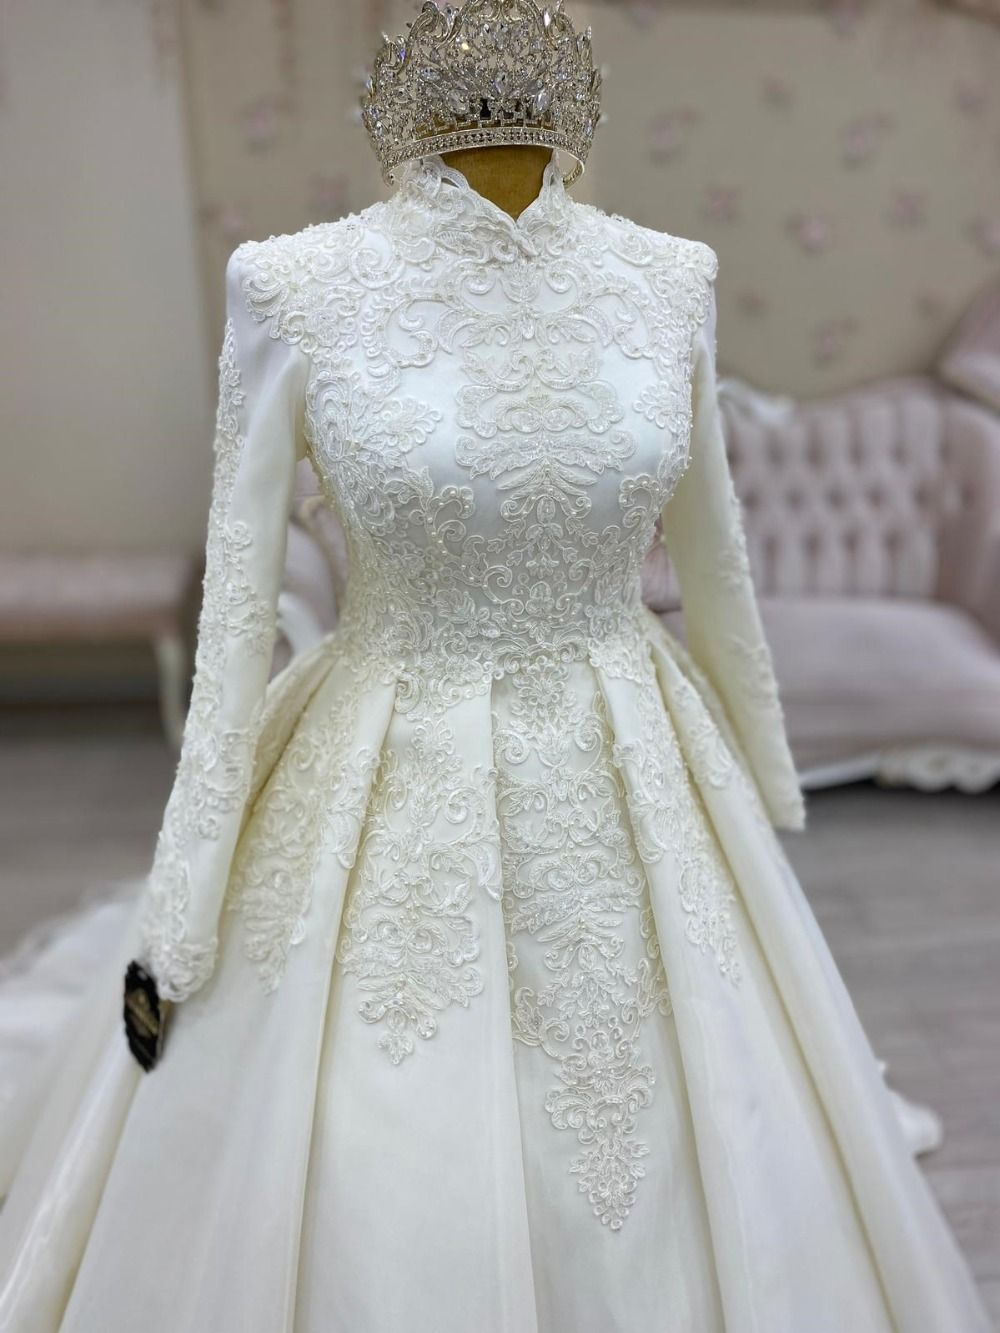 Vintage Islamic Muslim A Line Wedding Dresses Bridal Gowns Pattern Lace Appliques High Collar Long Sleeves Beading Arabic Dubai Formal Bride Dress 2022 From Sexybride, $142.07 DHgate